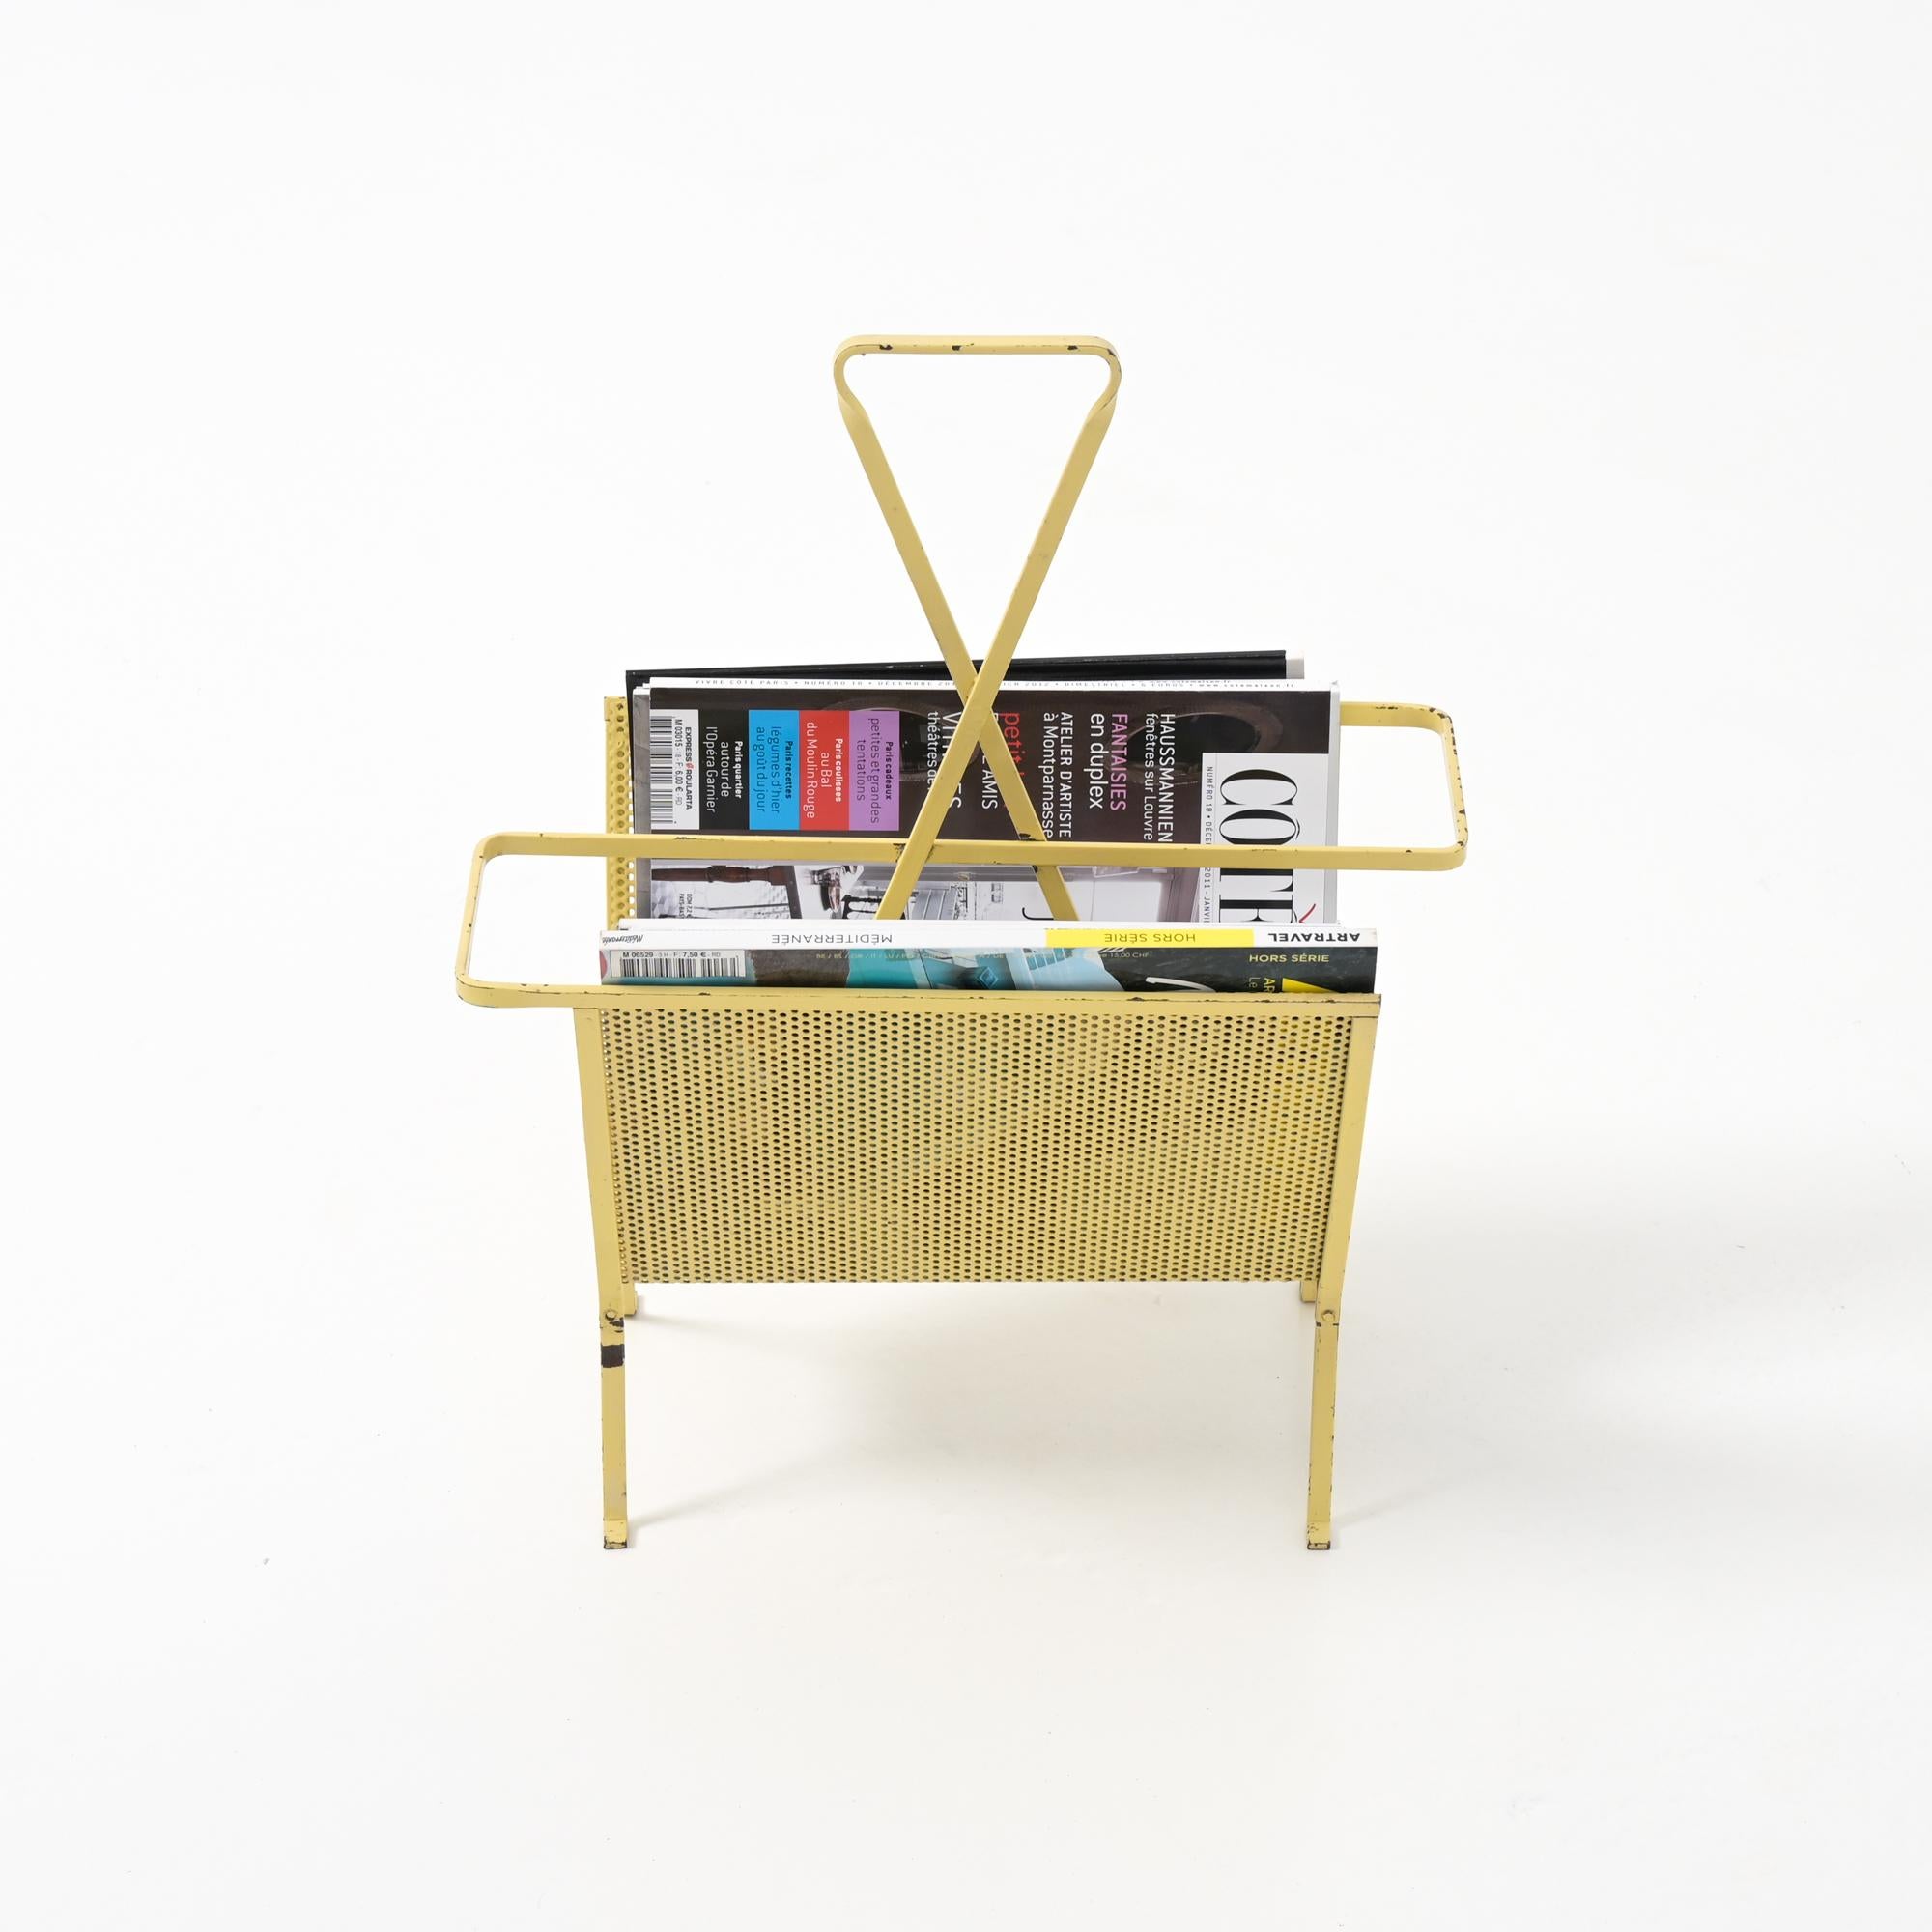 This pure and elegant magazine stand was designed by Mathieu Matégot (1910-2001) in the 1950s and manufactured by Artimeta.

The stand is made of soft yellow lacquered folded and perforated metal. The shape has a beautiful simplicity and consists of